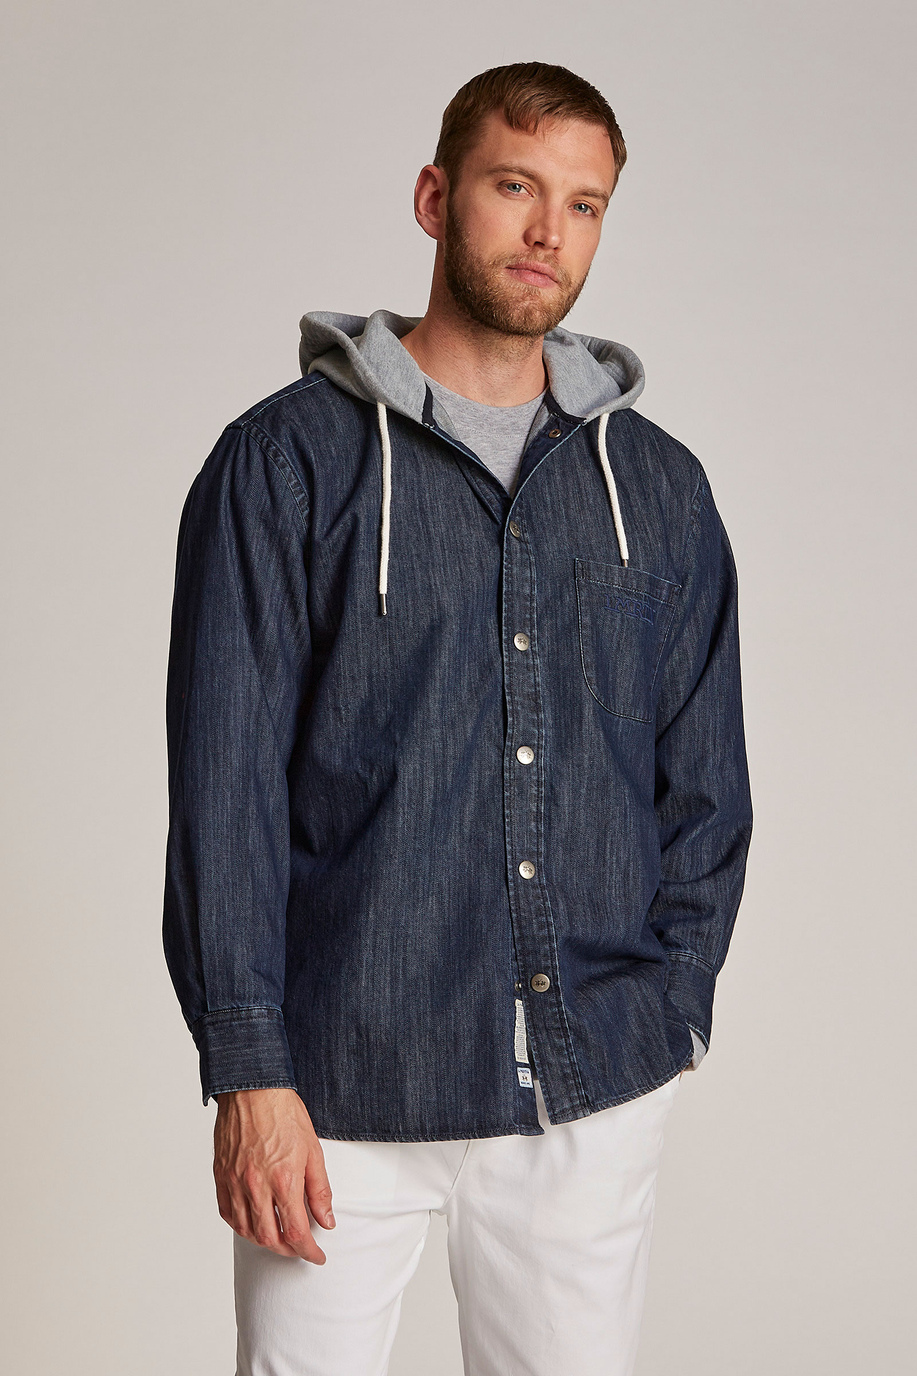 Men's oversized hooded jacket in 100% cotton fabric - Preview  | La Martina - Official Online Shop